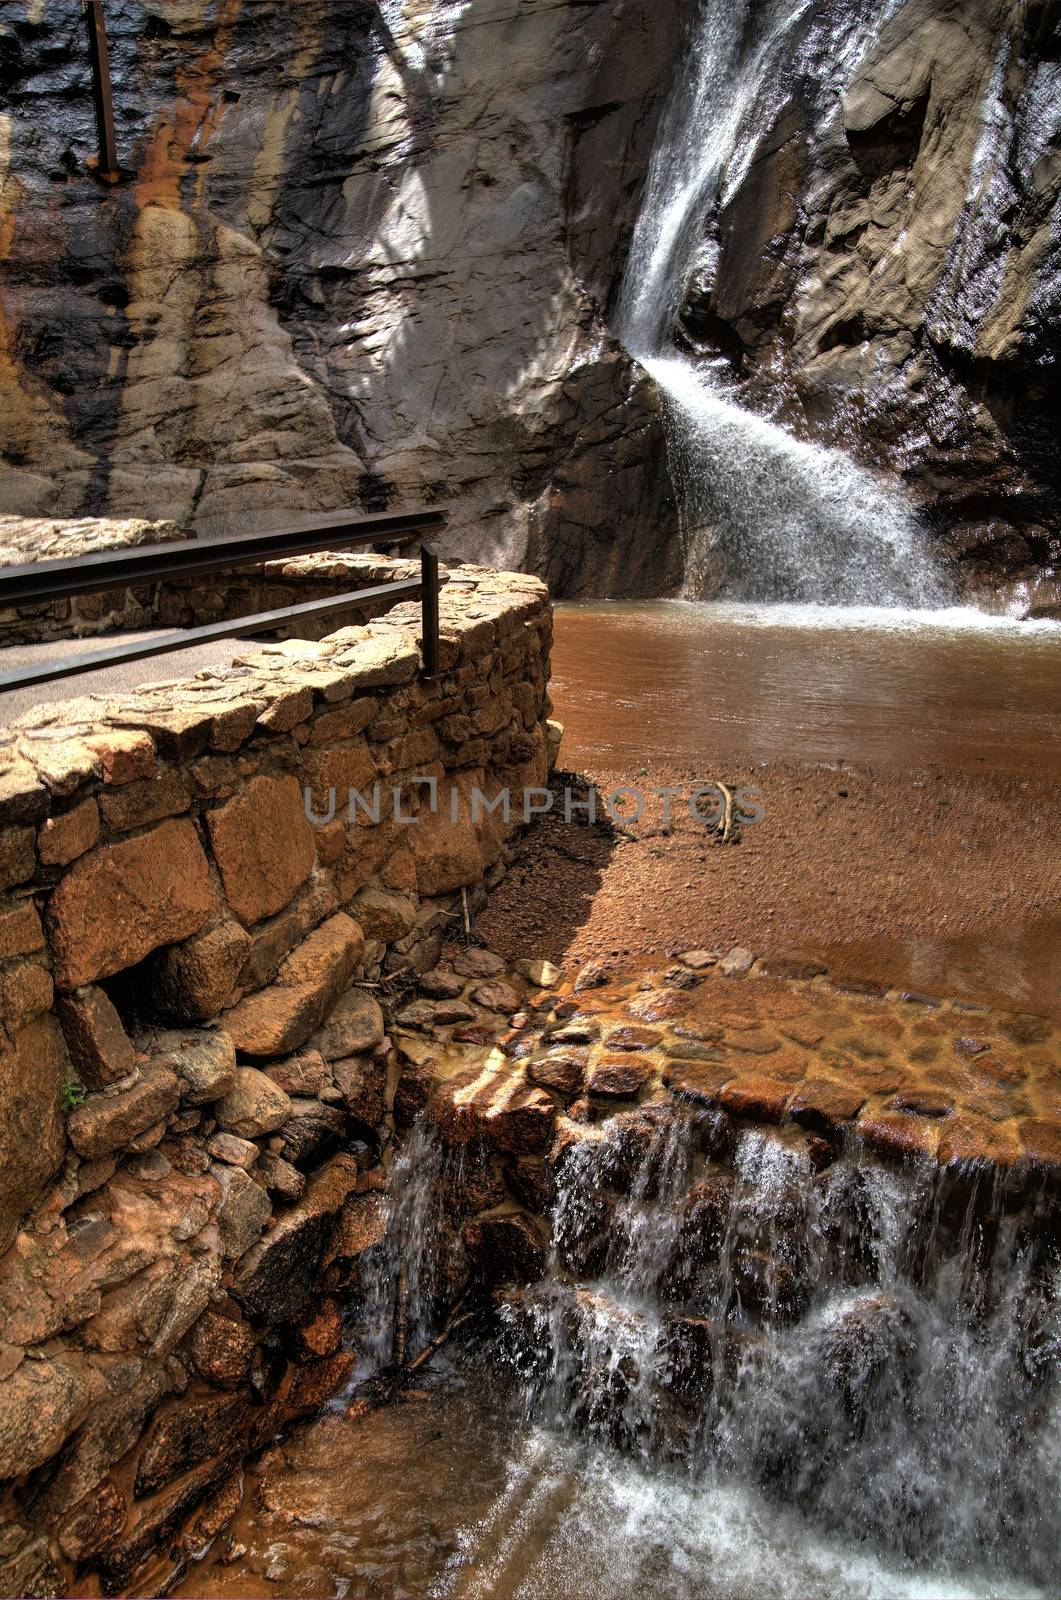 <span style=\"font-family: Arial, Helvetica, sans-serif; font-size: 11px; color: #7f7f7f; white-space: pre;\">Colorado Waterfall - HDR Photo. Colorado Springs, CO USA<span style=\"white-space: pre;\">	</span></span>